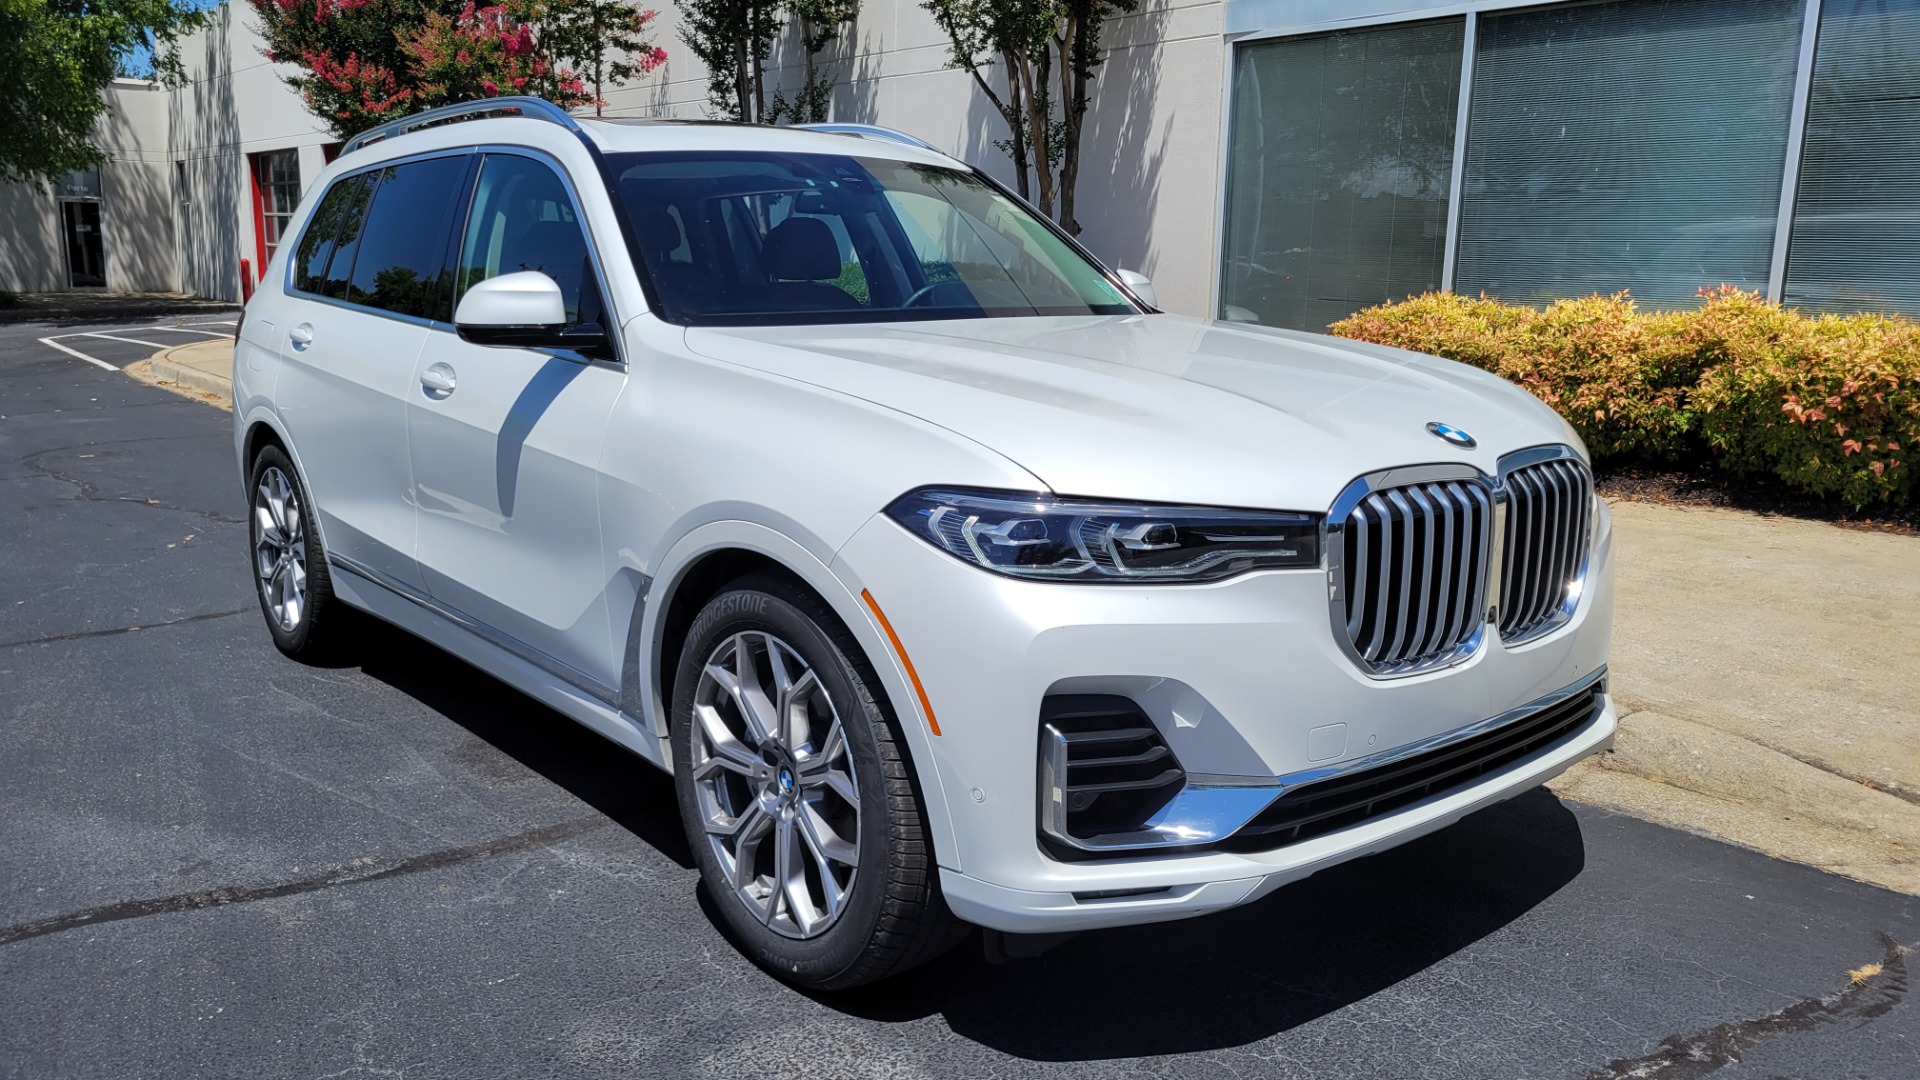 Used 2019 BMW X7 XDRIVE40I PREMIUM / NAV / HUD / PARK ASST PLUS / REMOTE START / 3D VIEW for sale $71,095 at Formula Imports in Charlotte NC 28227 5